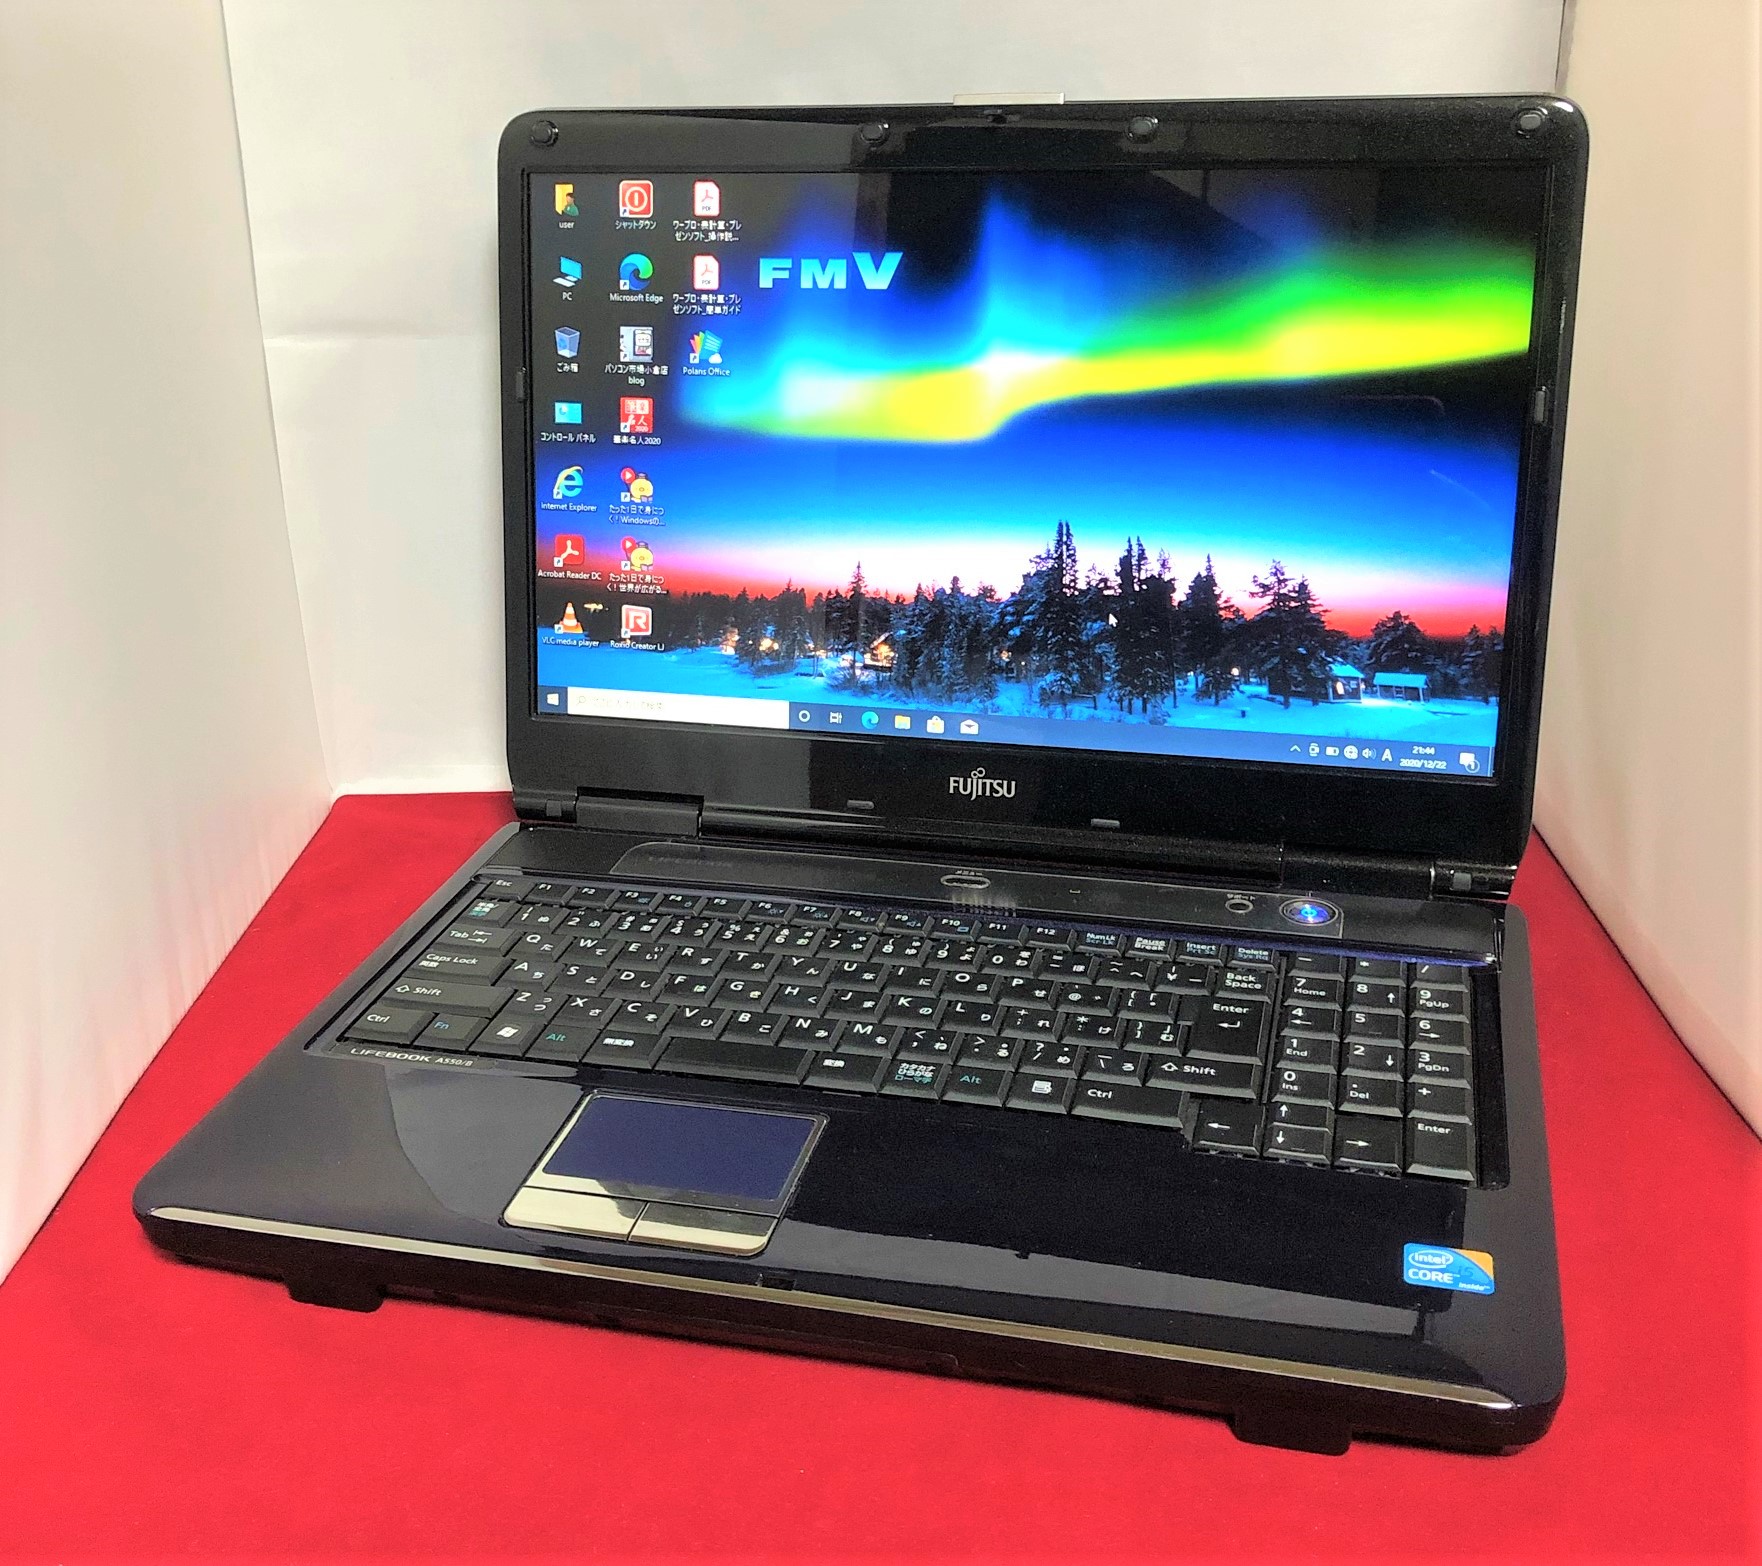 PC/タブレット富士通LIFEBOOK A550 i5/8GB可 Win10Pro/Office